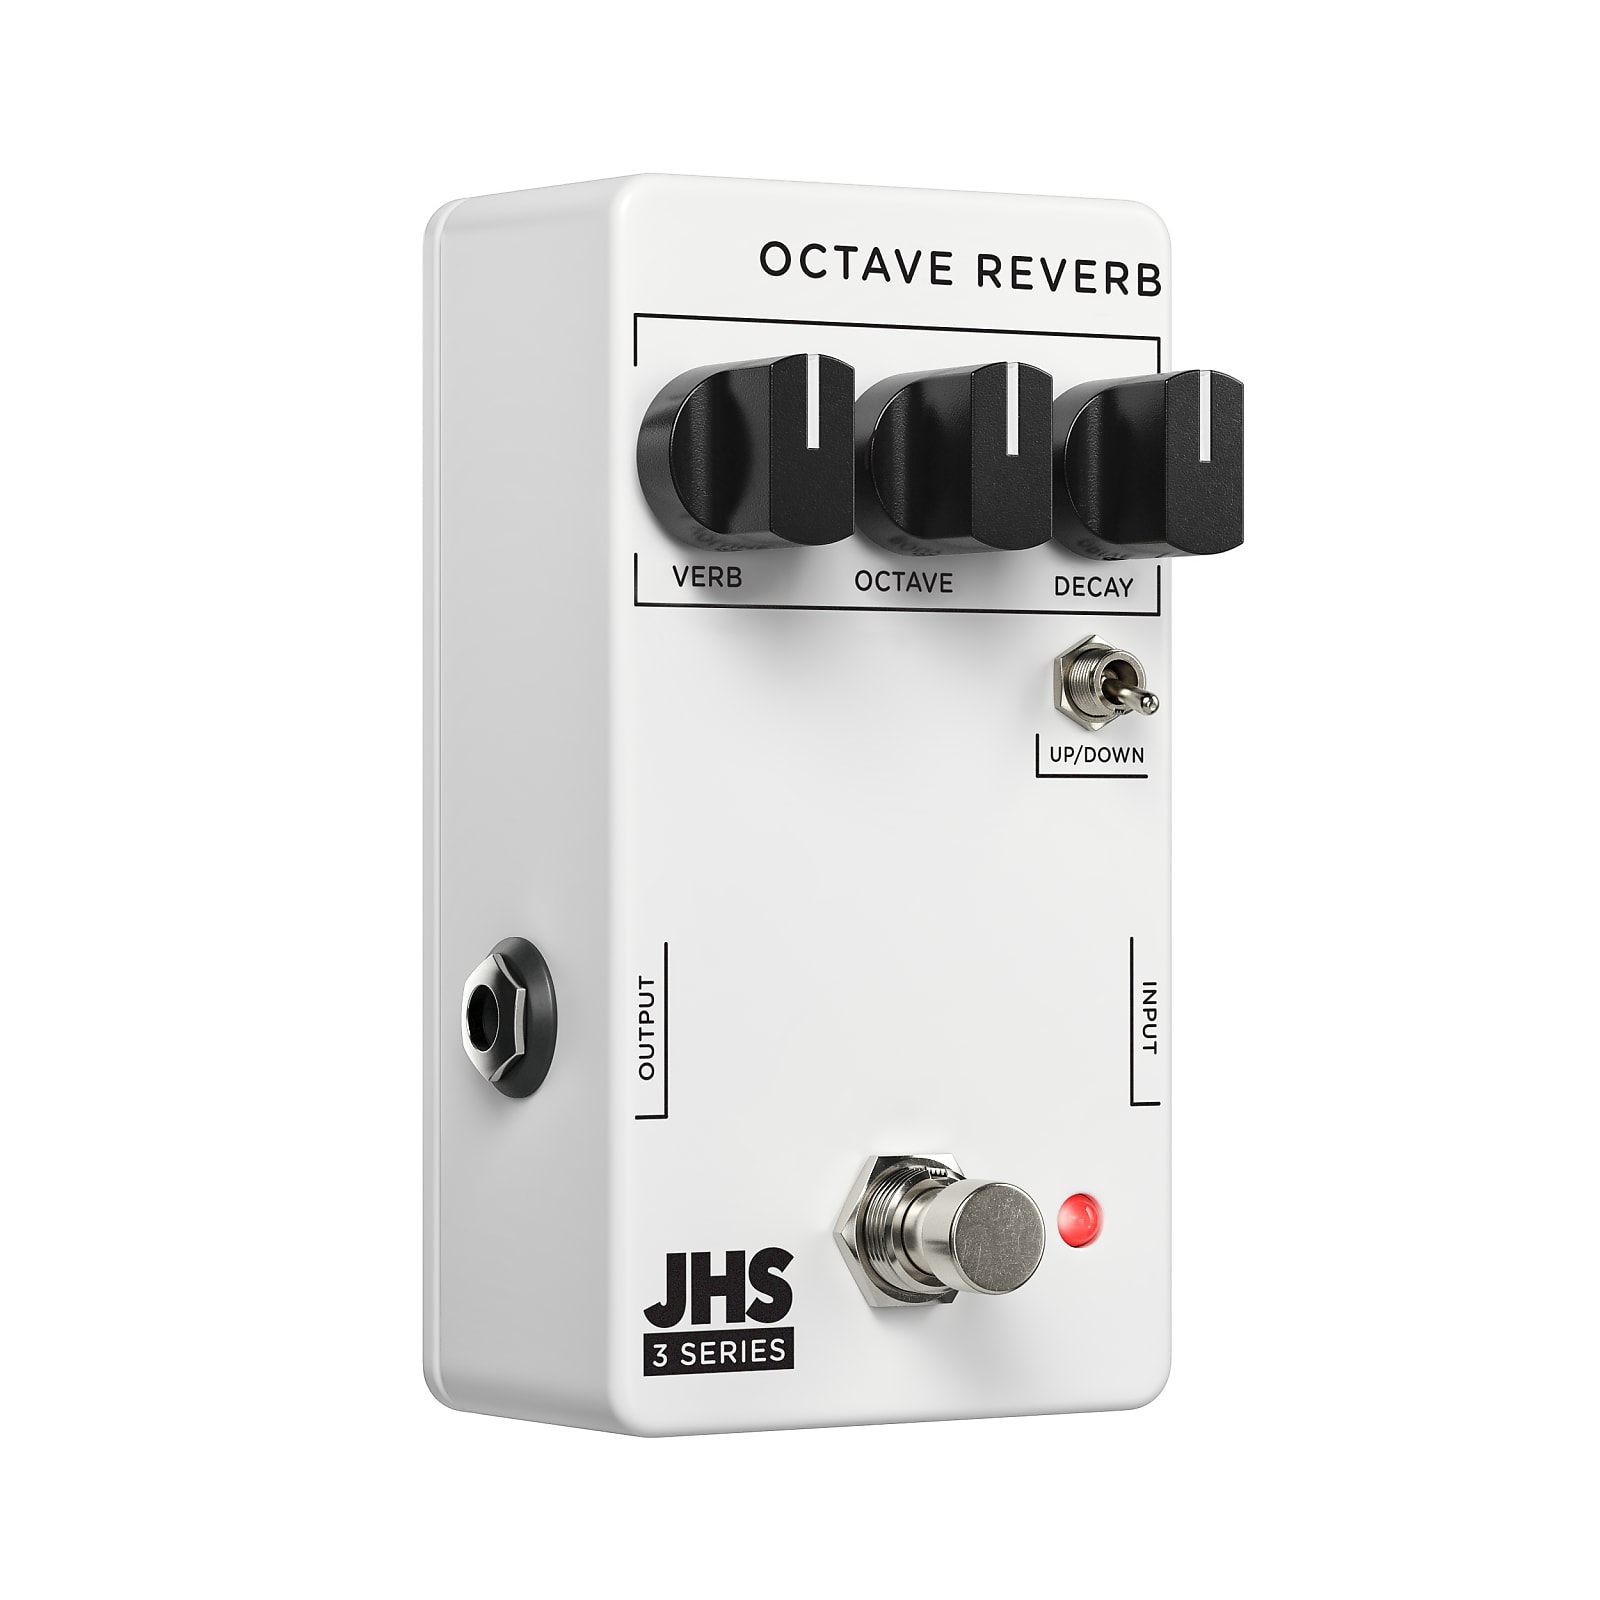 JHS 3 Series Octave Reverb Effects Pedal